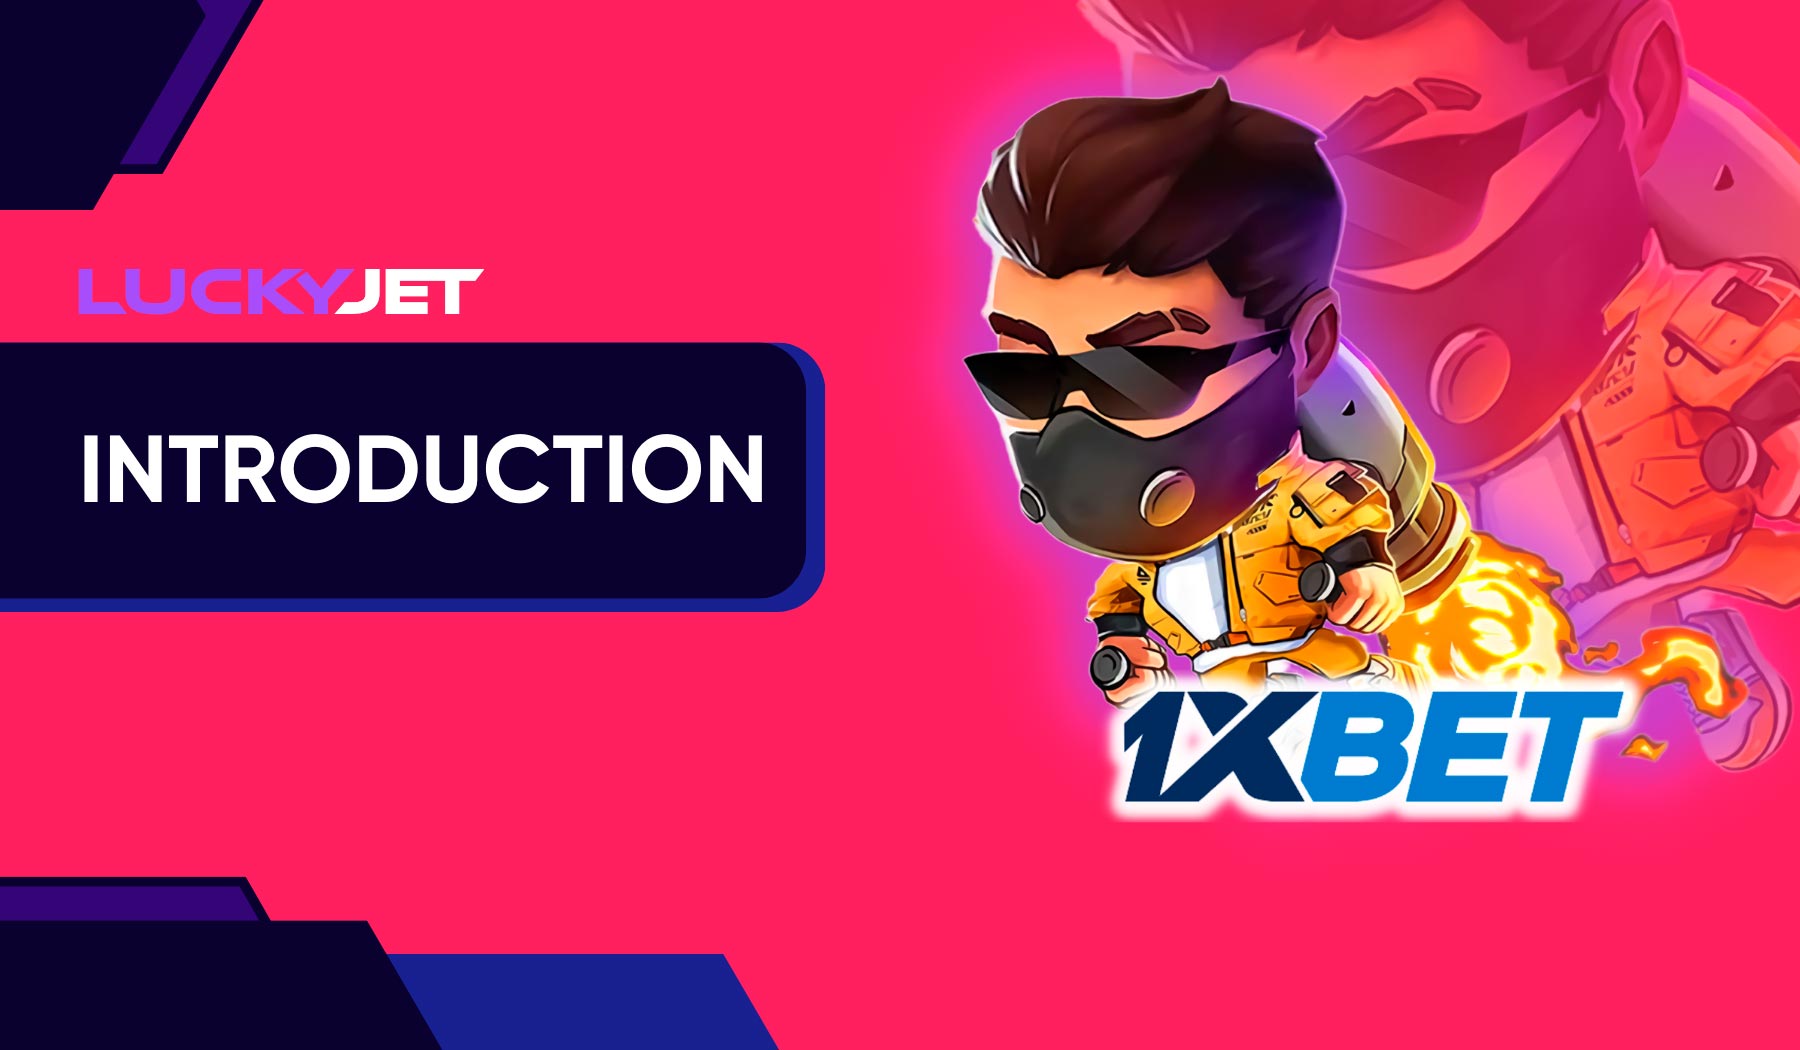 1xbet, a famous online casino, has launched Lucky Jet